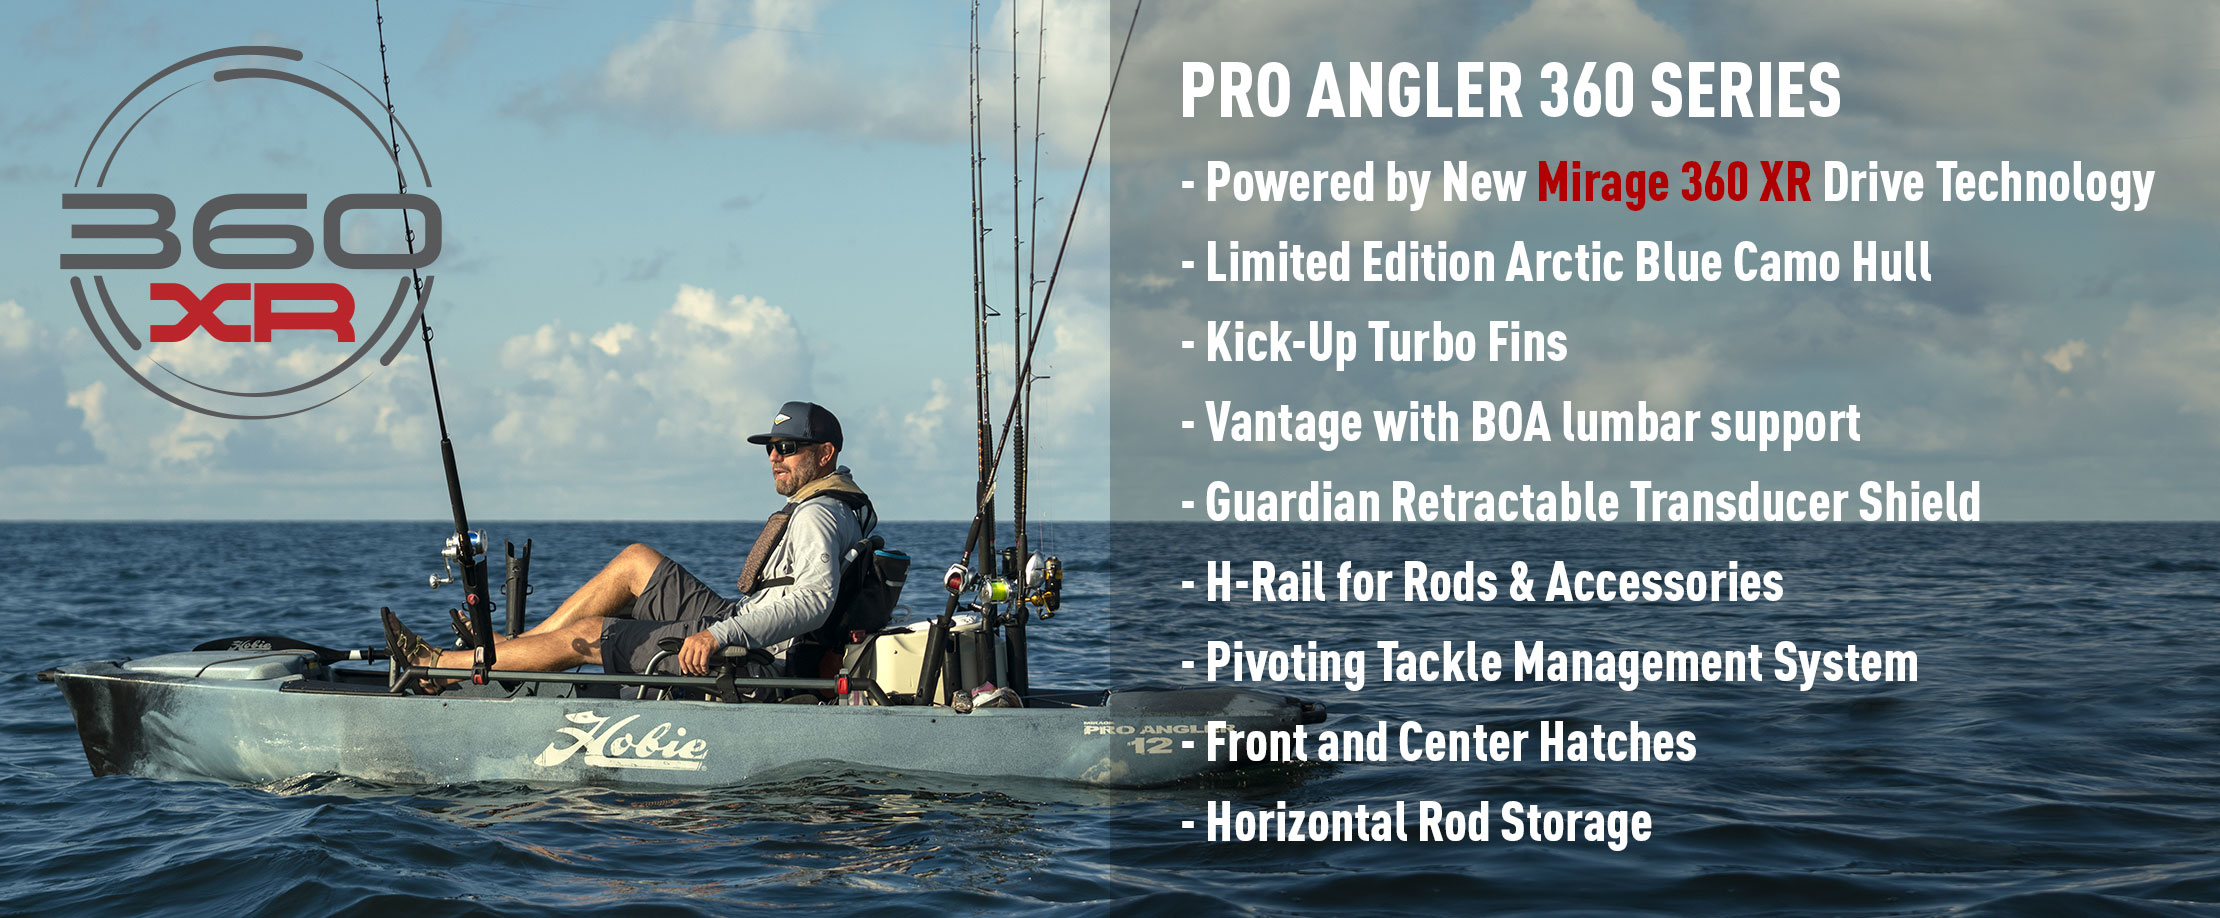 Mirage Pro Angler 12 with 360XR Drive Technology Features